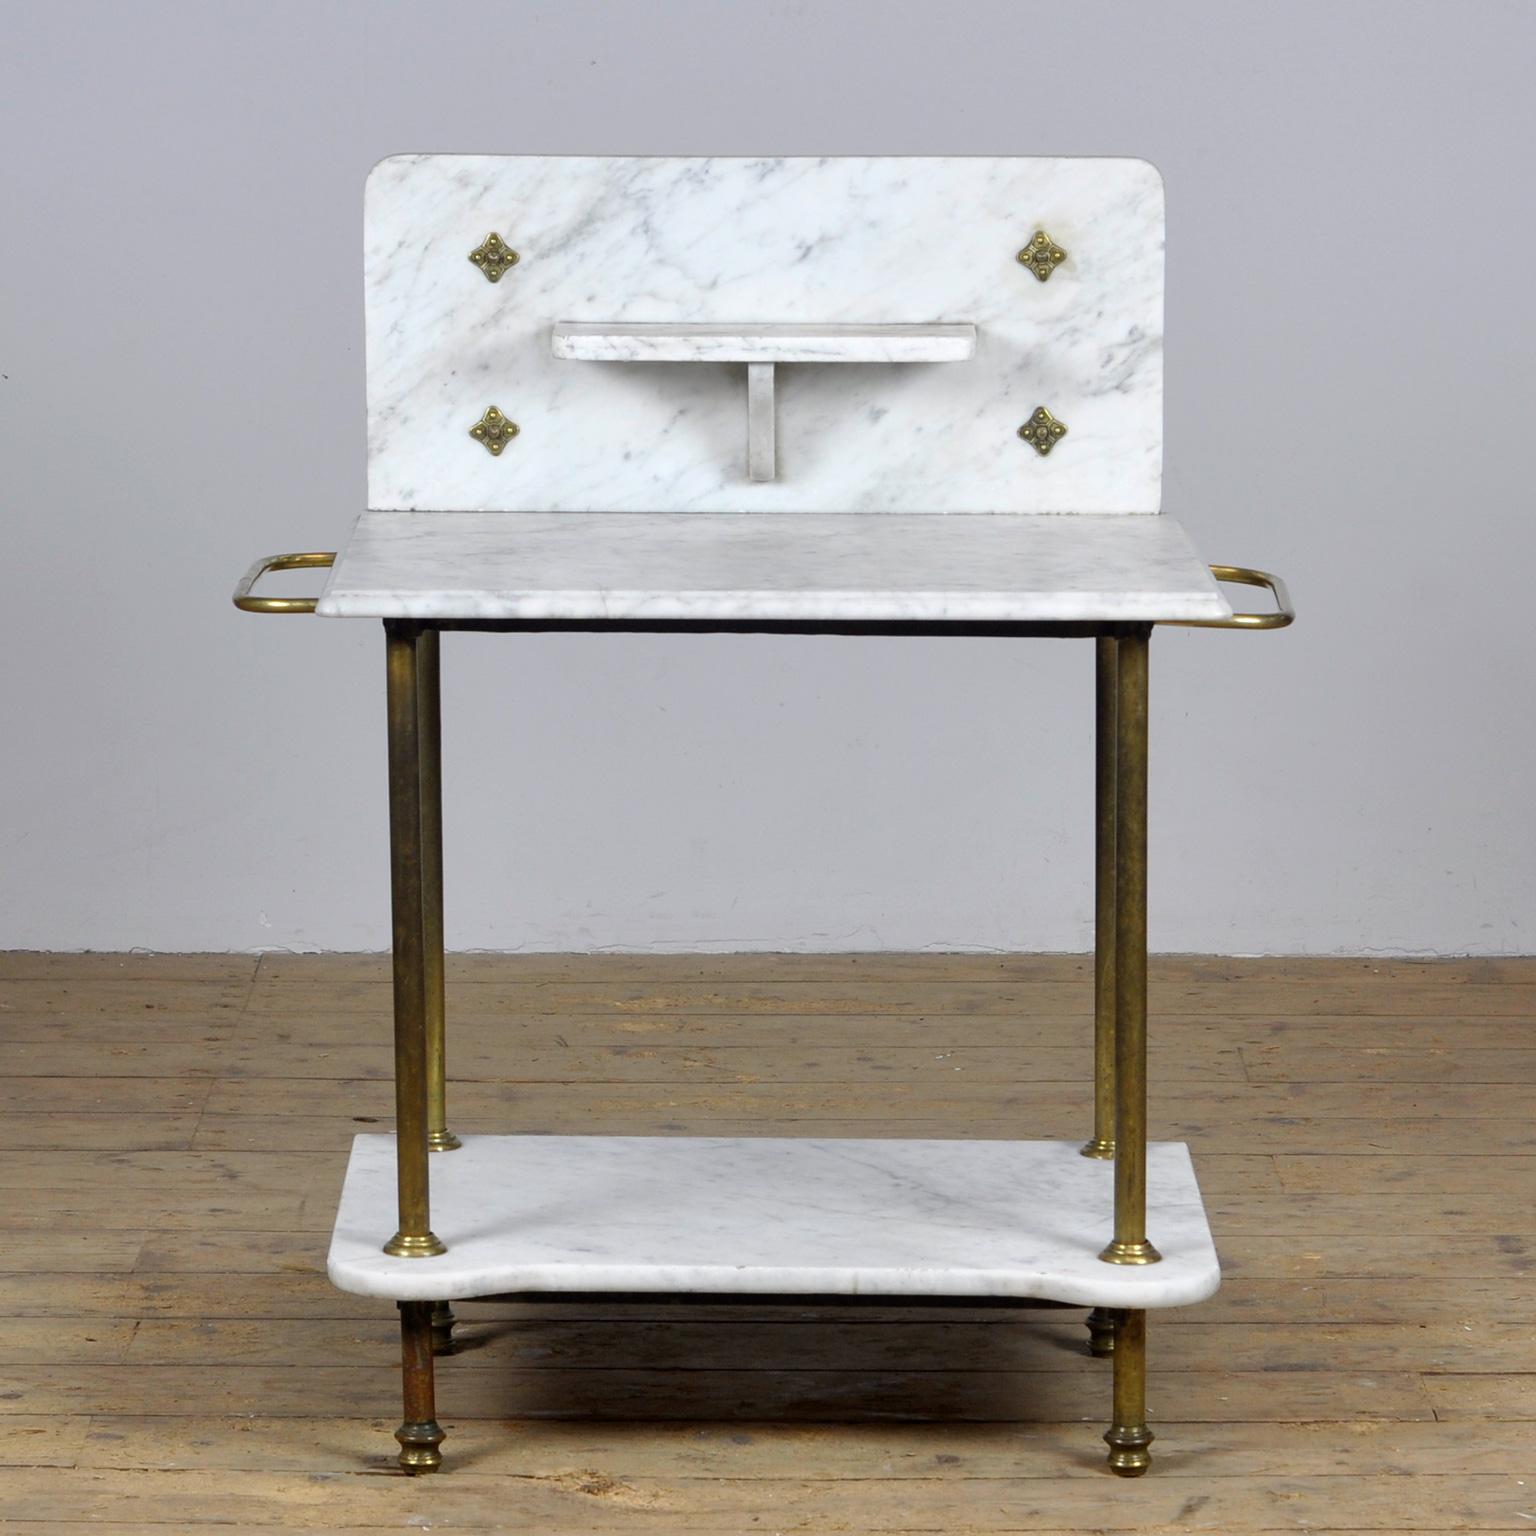 Antique brass and marble washbasin from circa 1880. High quality brass and marble washbasin with compact proportions. Just right for a smaller bathroom or sink. Solid and strong, and in good condition. Has two towel rails.
Height of the marble top